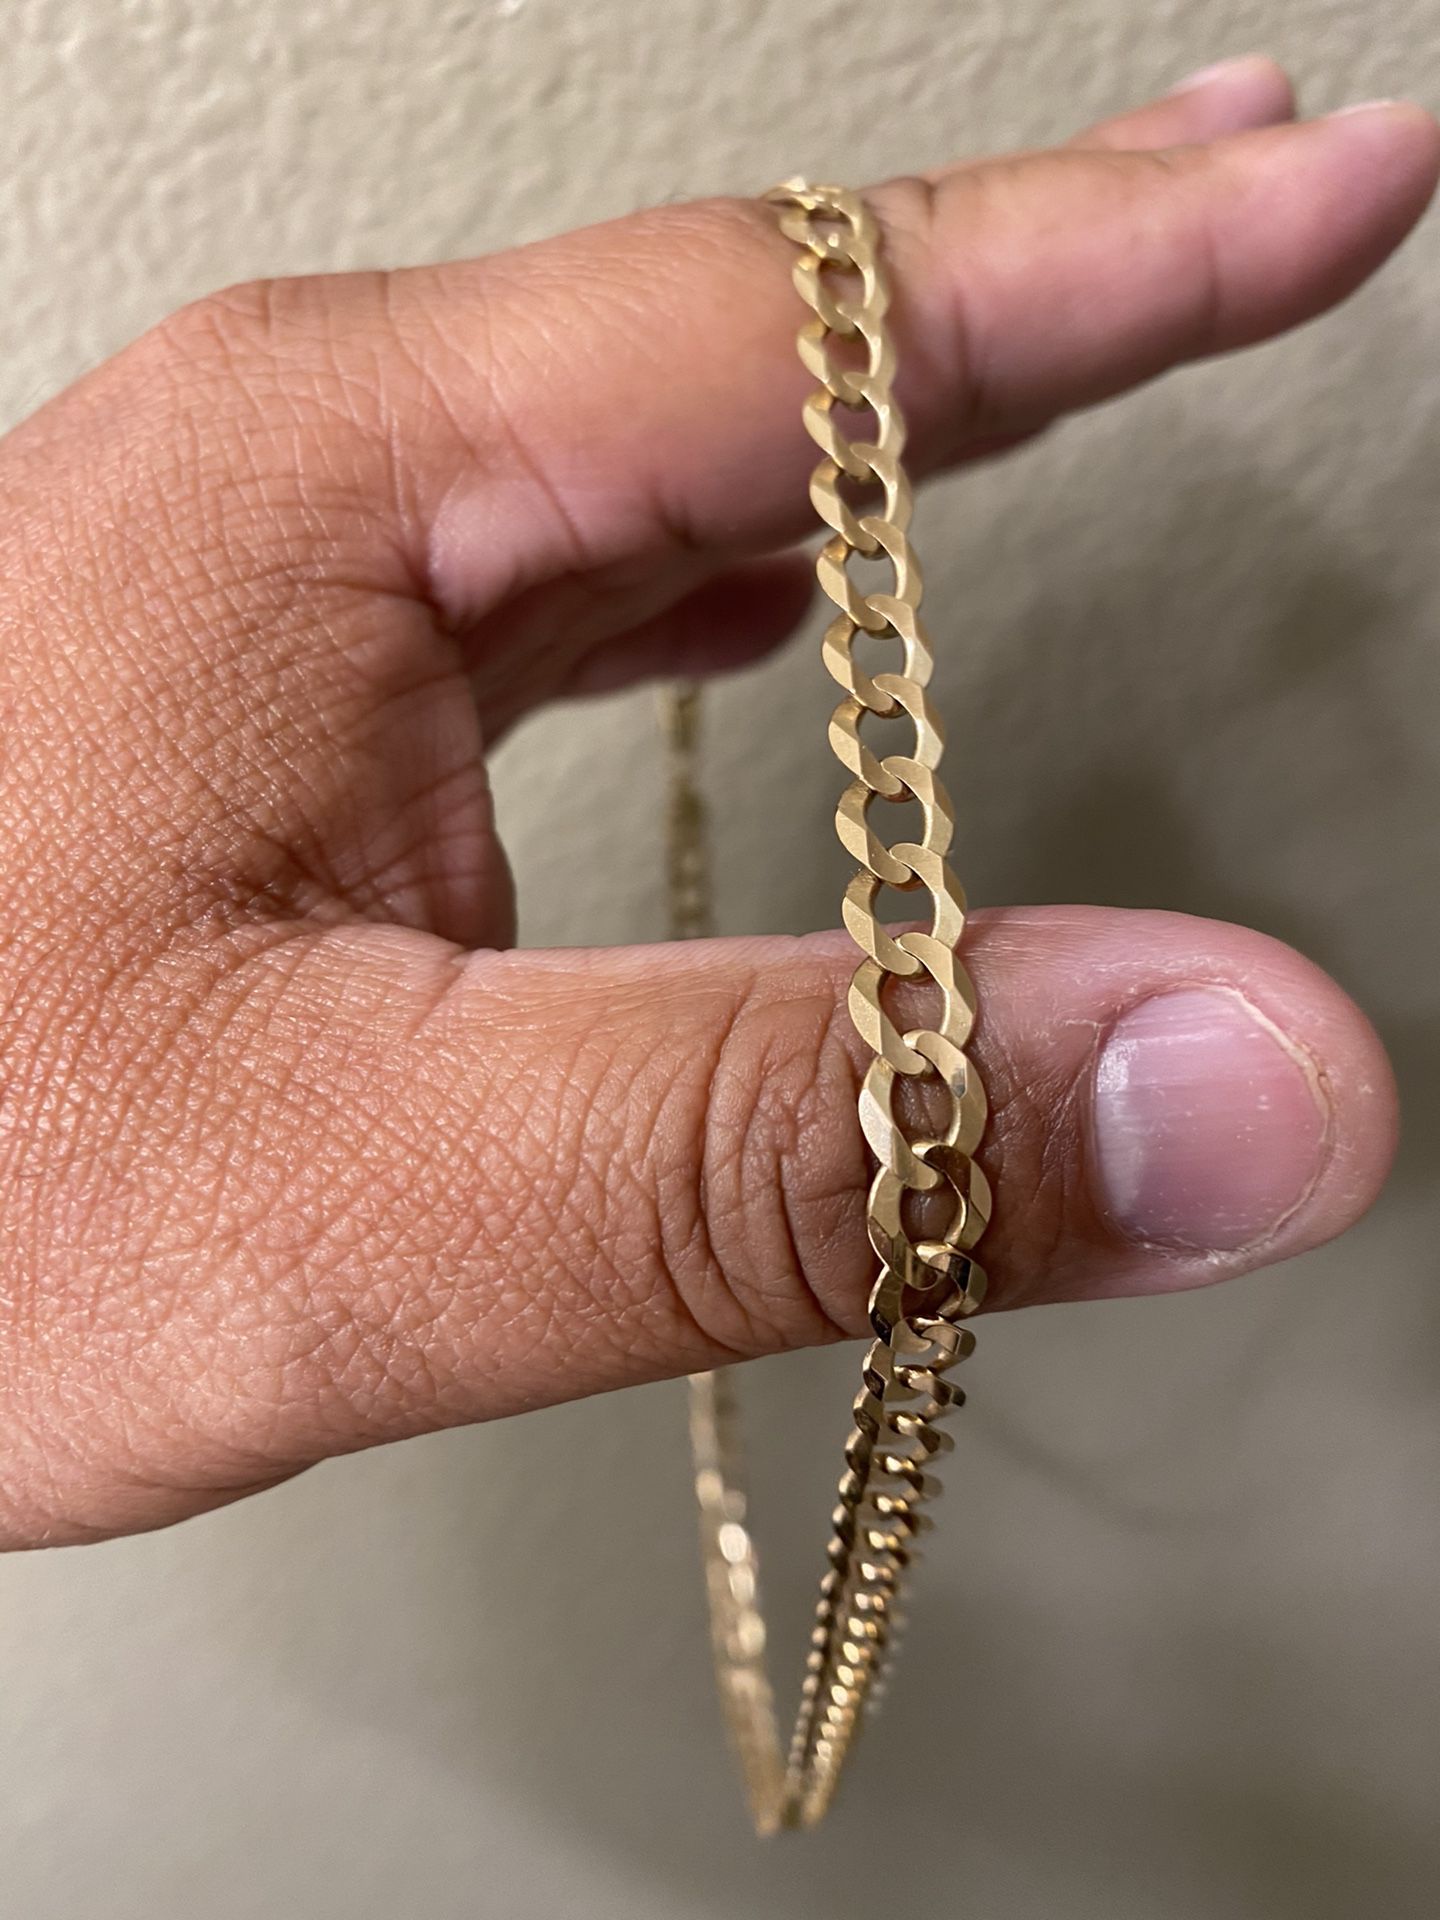 14k gold chain 26.1G 22inch (FIRM PRICE- OFFERS GET BLOCKED)